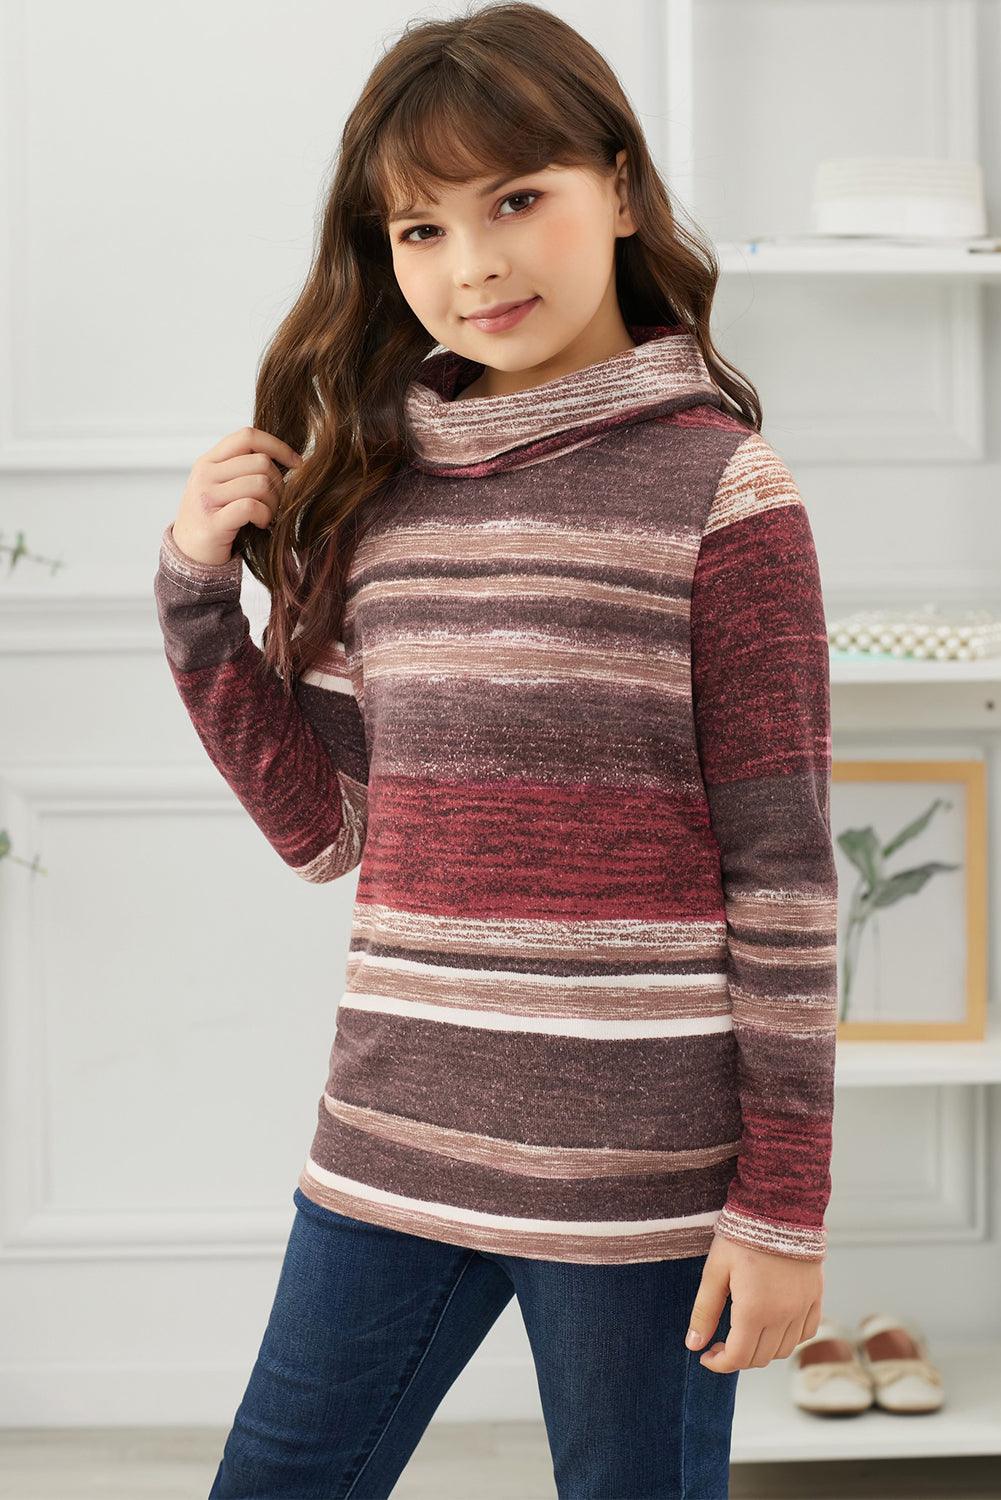 Girls Striped Cowl Neck Top with Pockets - Flyclothing LLC